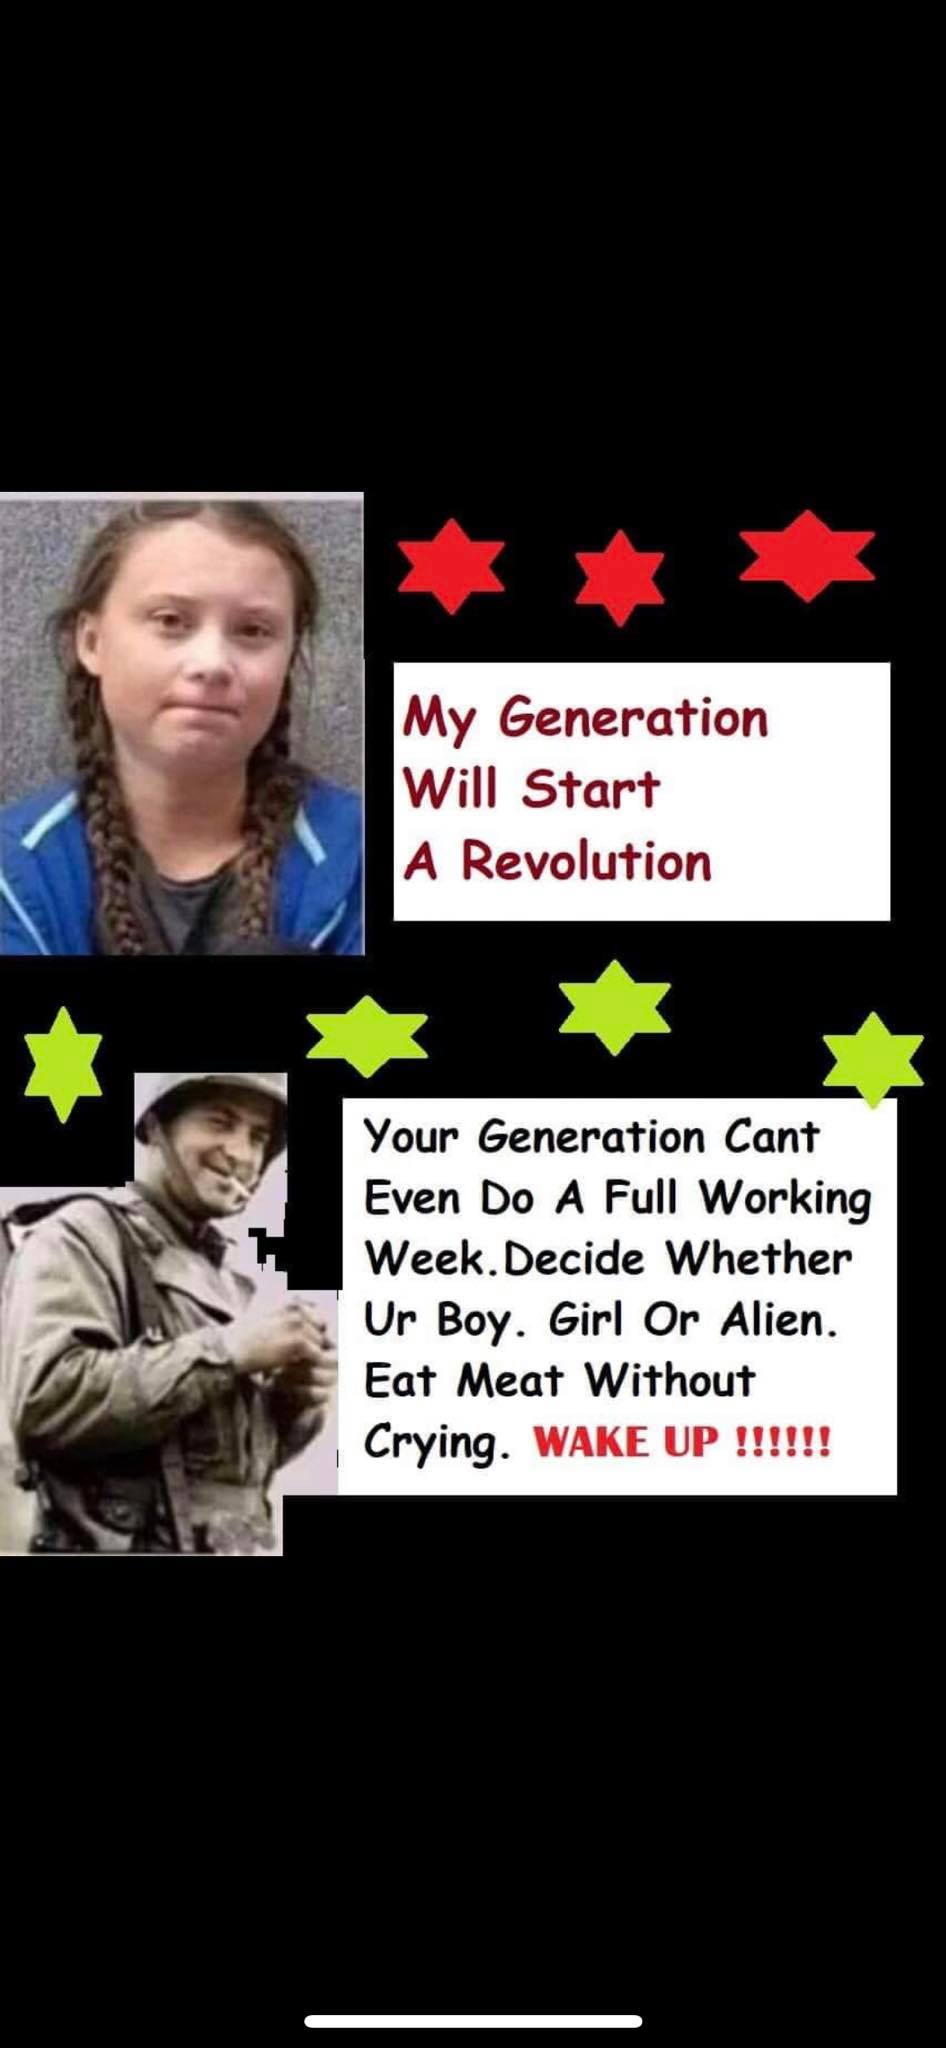 boomer boomer-memes boomer text: My Generation Will Start A Revolution Your Generation Cant Even Do A Full Working Week. Decide Whether I-Jr Boy. Girl Or Alien. Eat Meat Without Crying. WAKE UP 